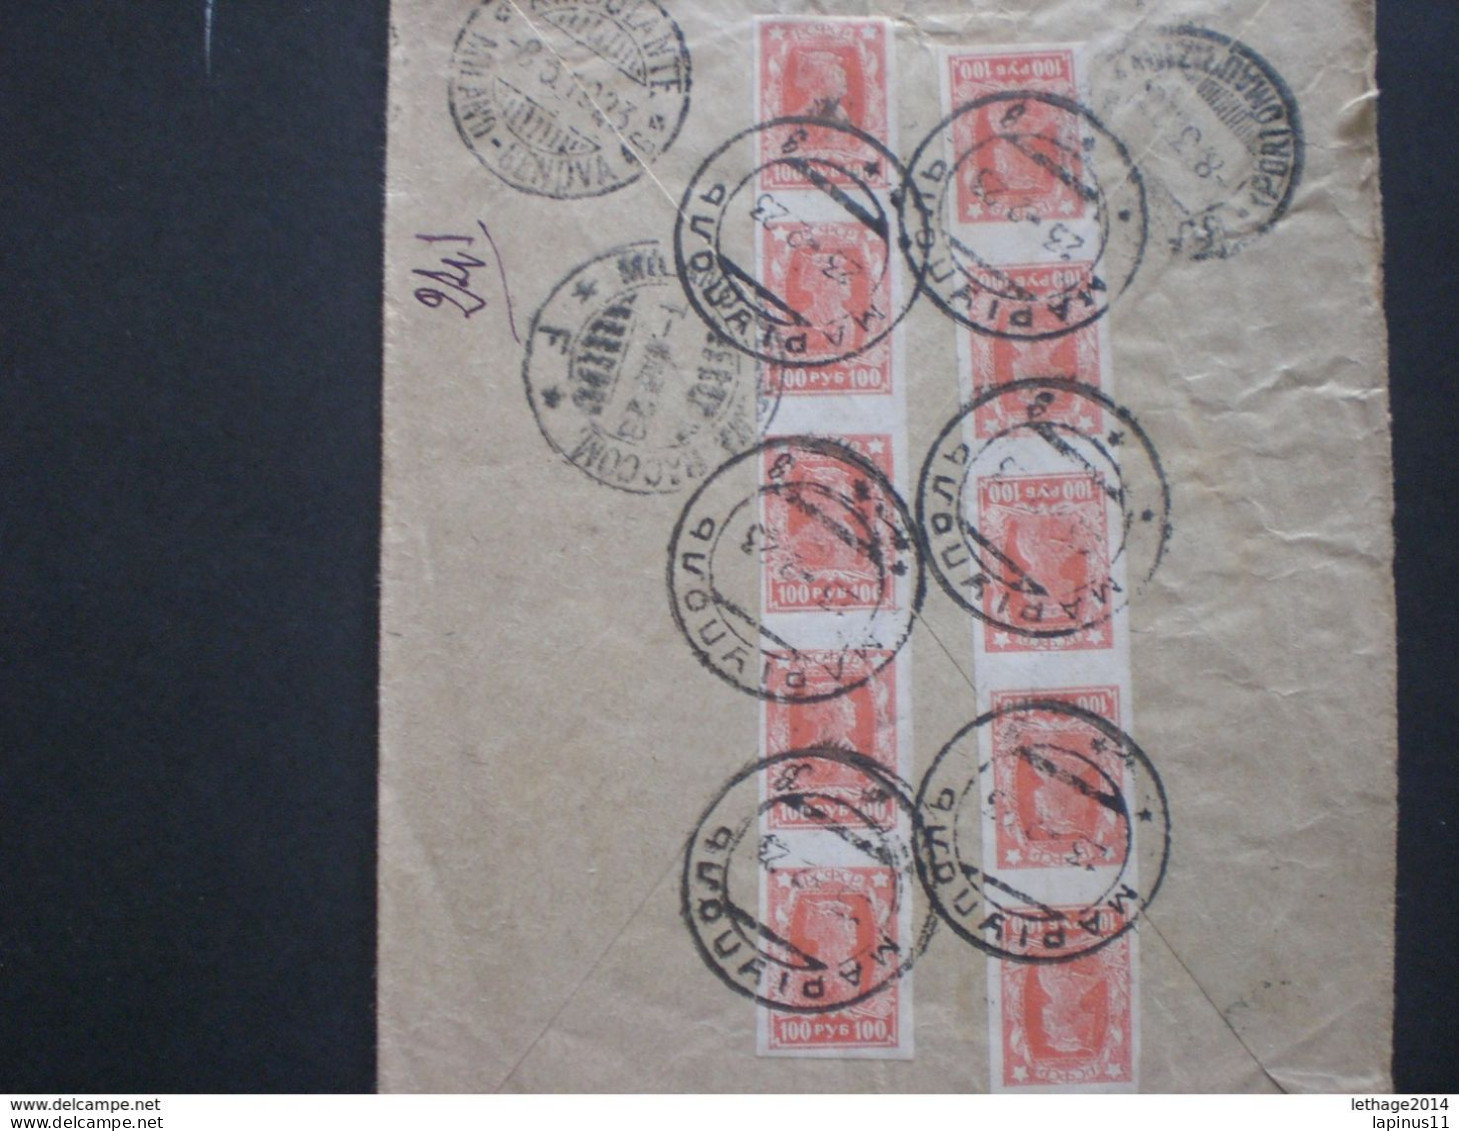 RUSSIA RUSSIE РОССИЯ STAMPS COVER 1923 REGISTER MAIL RUSSLAND TO ITALY OVER STAMPS RRR RIF. TAGG (178) - Lettres & Documents